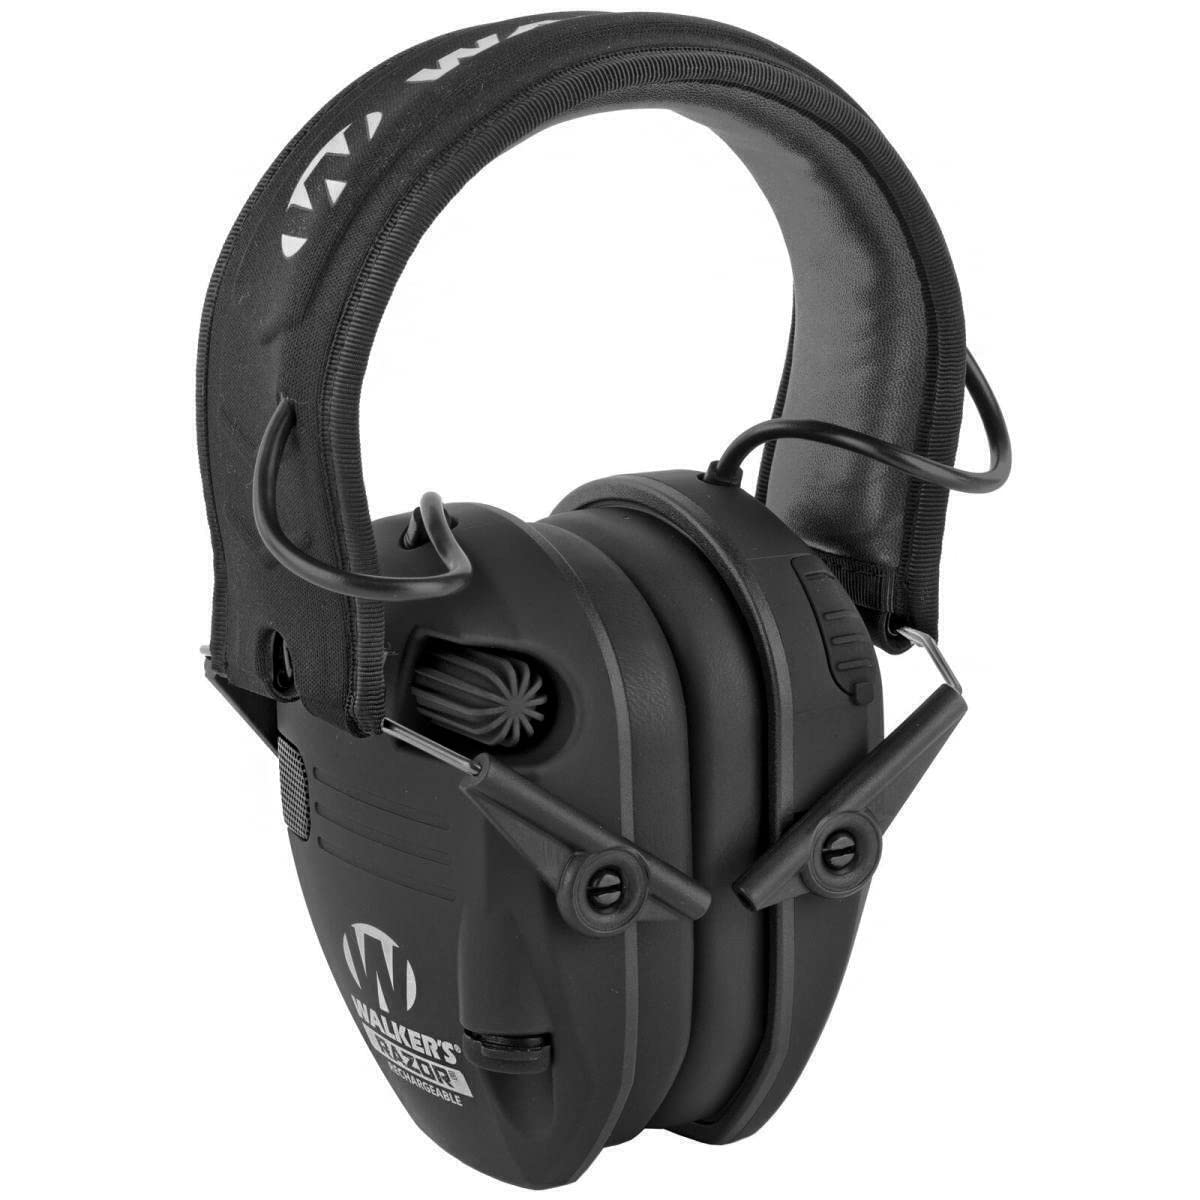 Walker's Unisex Razor Rechargeable Hunting Shooting Hearing Protection Noise Reduction Low-Profile Electronic Earmuffs